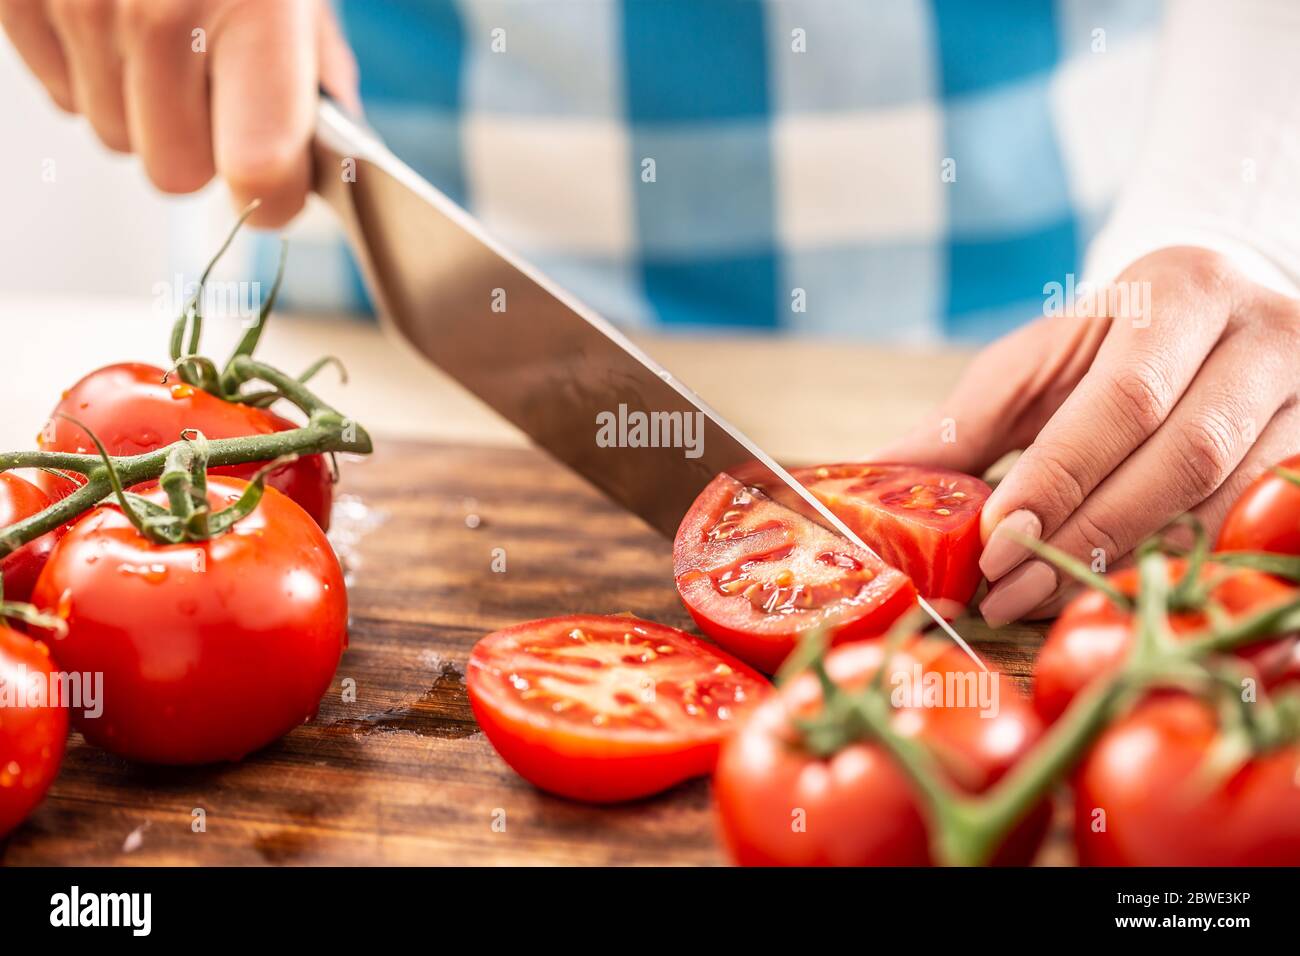 Detail of female hands cutting a tomato by a knife on a chopping board with more fresh tomatoes around Stock Photo